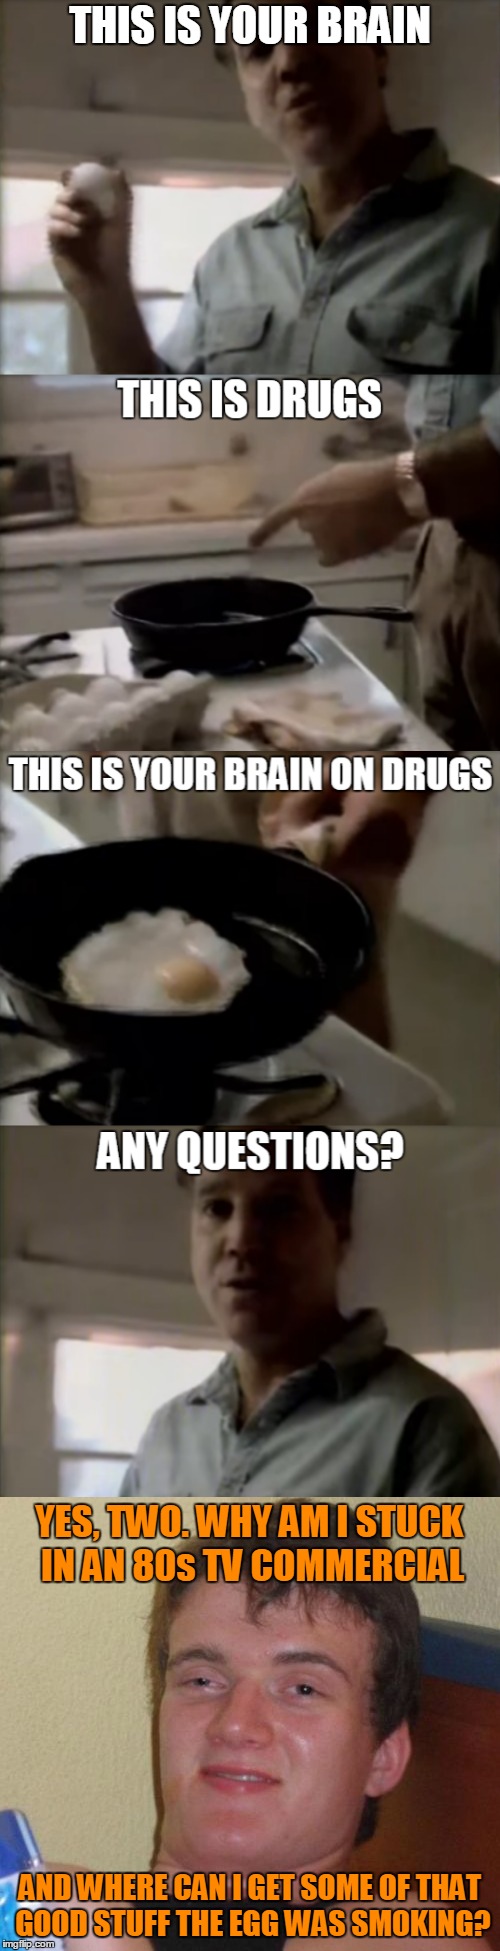 Always Look On the Sunny Side Up Side | THIS IS YOUR BRAIN; YES, TWO. WHY AM I STUCK IN AN 80s TV COMMERCIAL; AND WHERE CAN I GET SOME OF THAT GOOD STUFF THE EGG WAS SMOKING? | image tagged in memes,10 guy,drugs are bad,1980s,tv,commercial | made w/ Imgflip meme maker